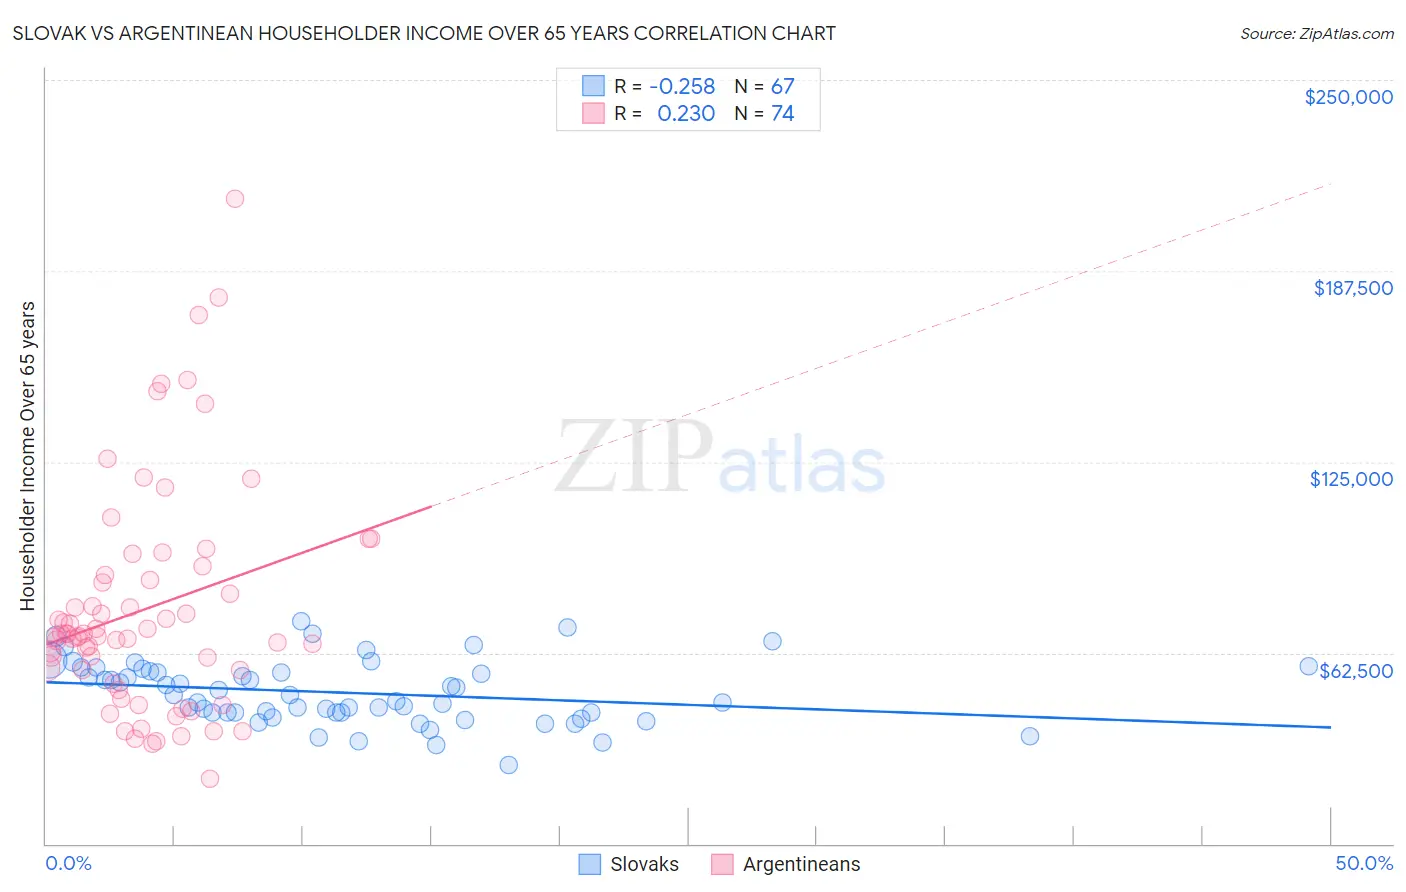 Slovak vs Argentinean Householder Income Over 65 years